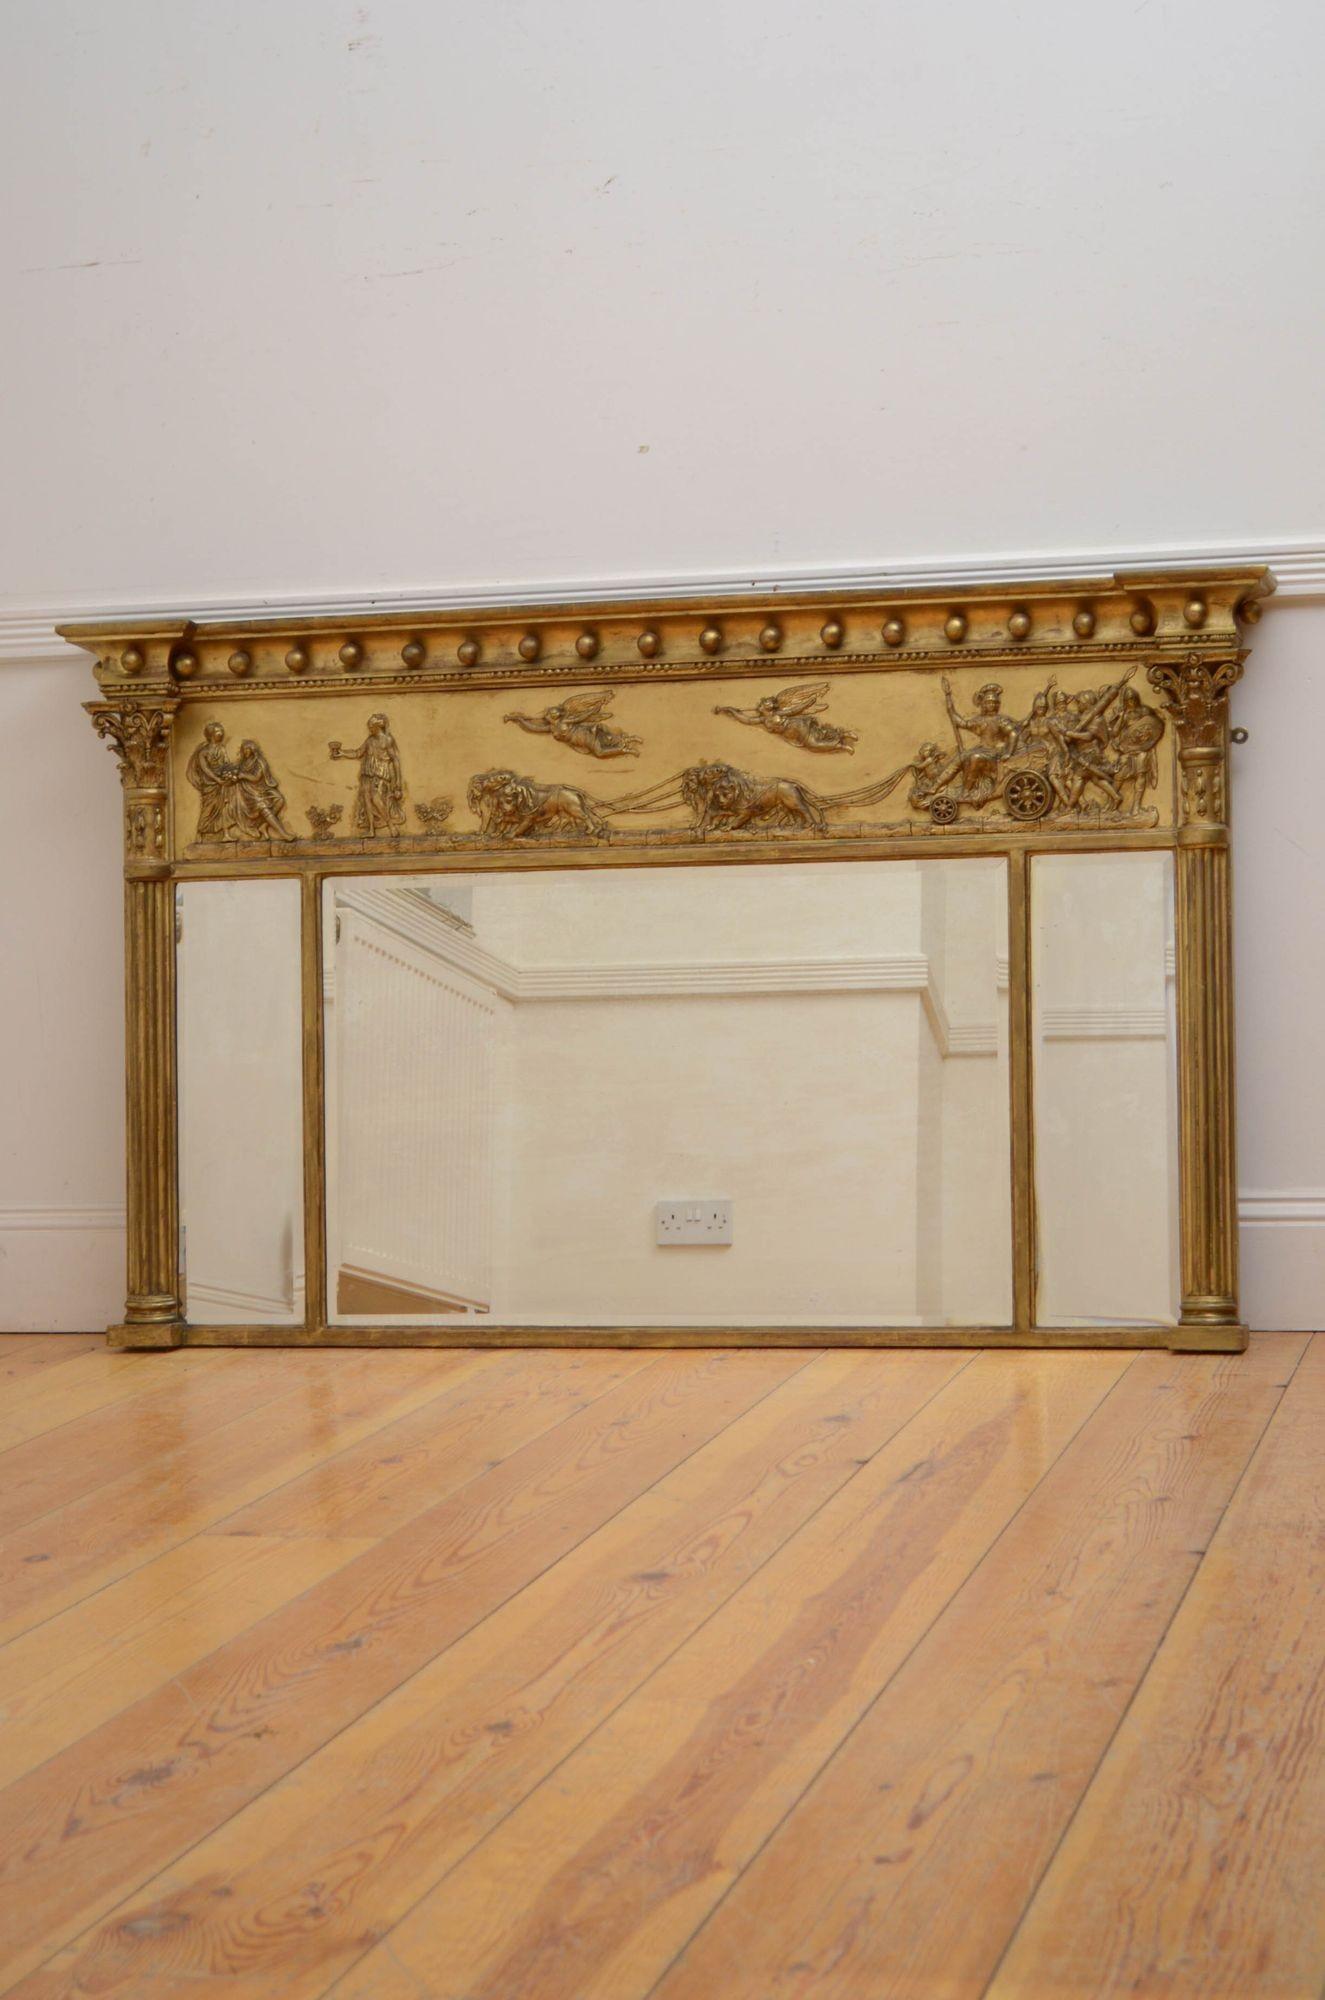 Sn5394 A large gilded over mantel mirror, having three original bevelled edge mirrors, in giltwood frame with cavetto cornice and Neoclassical scene to frieze all flanked by reeded columns with finely carved capitals. This antique mirror retains its